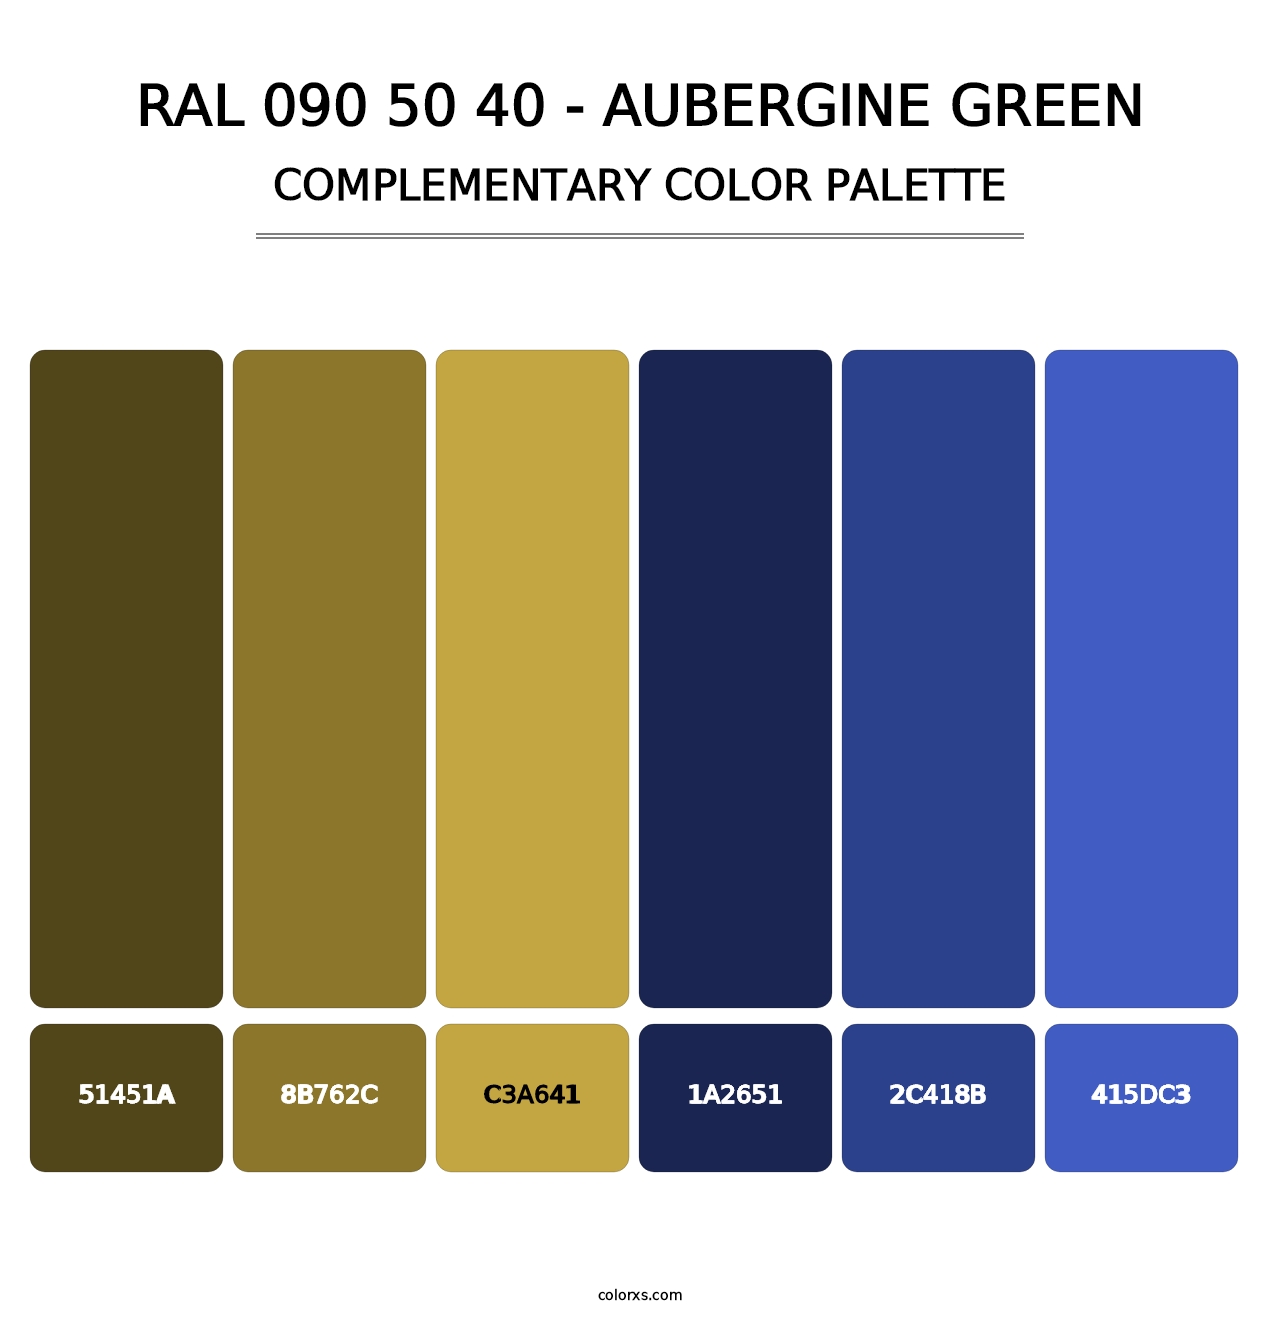 RAL 090 50 40 - Aubergine Green - Complementary Color Palette